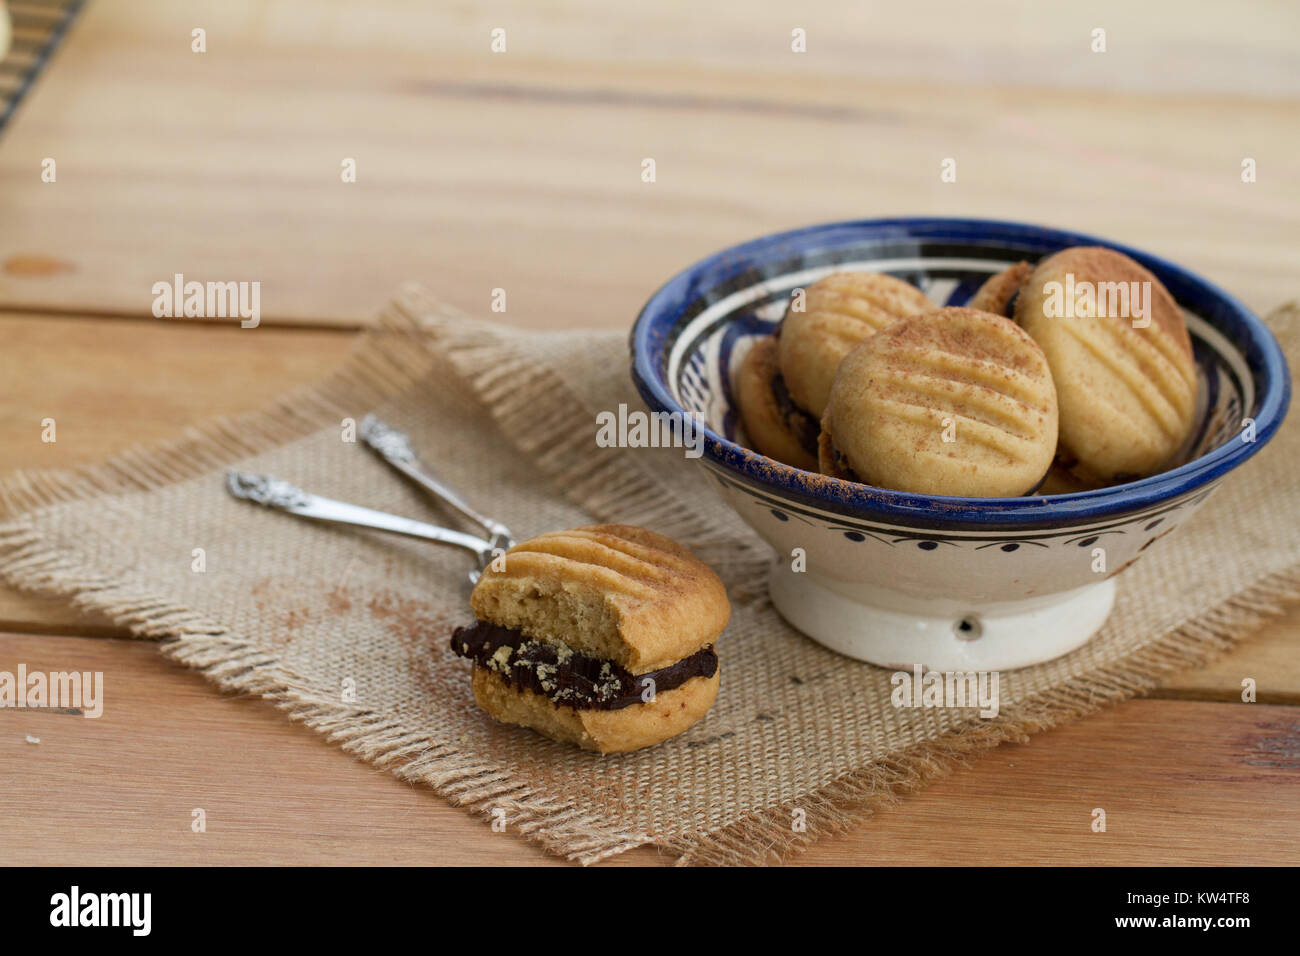 Chocolate filled melting moments on wooden table Stock Photo